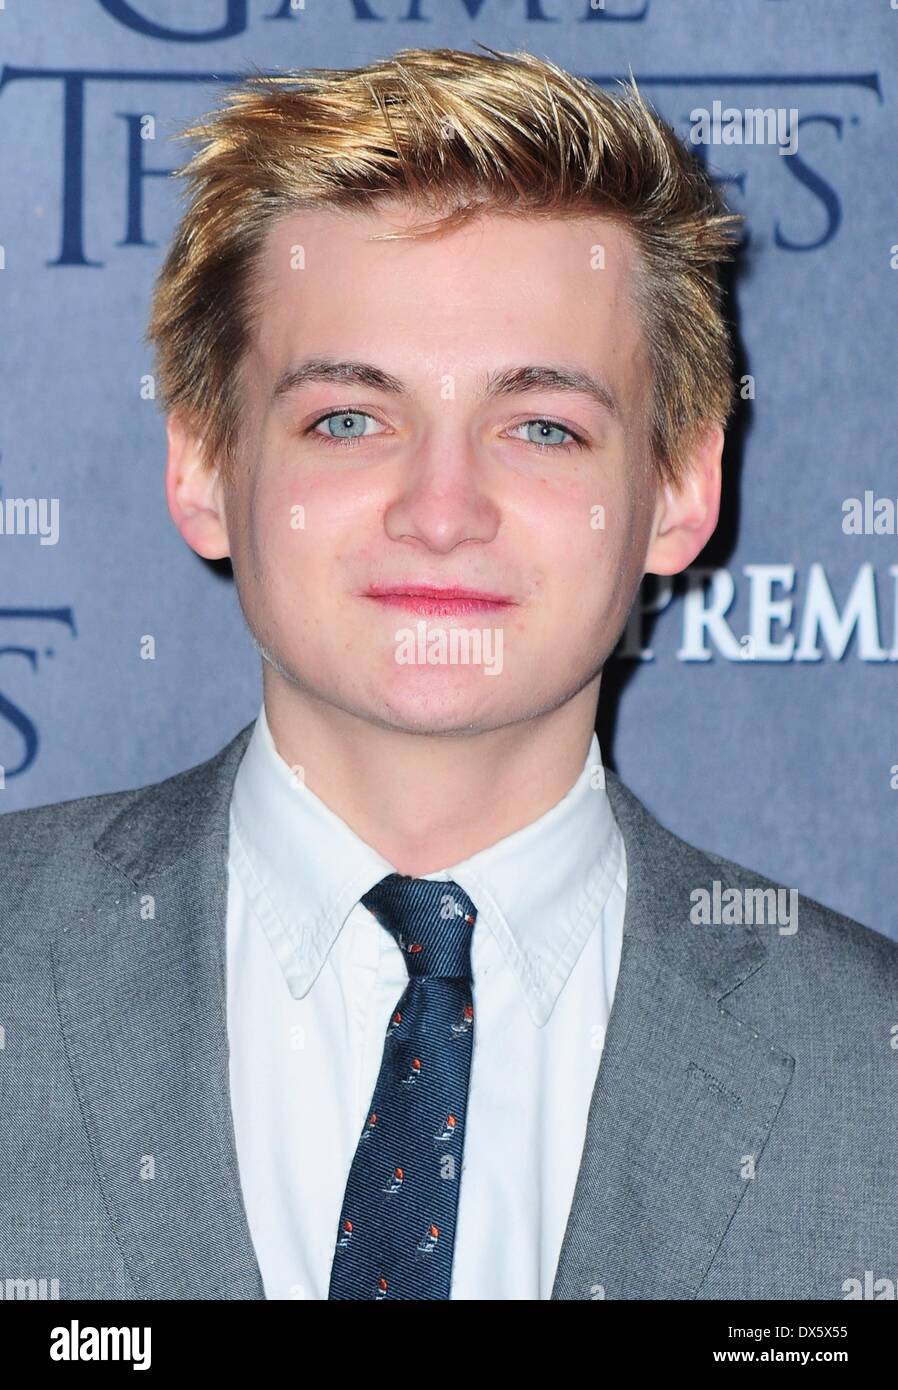 New York, NY, USA. 18th Mar, 2014. Jack Gleeson at arrivals for HBO's GAME OF THRONES Fourth Season Premiere, Avery Fisher Hall at Lincoln Center, New York, NY March 18, 2014. Credit:  Gregorio T. Binuya/Everett Collection/Alamy Live News Stock Photo